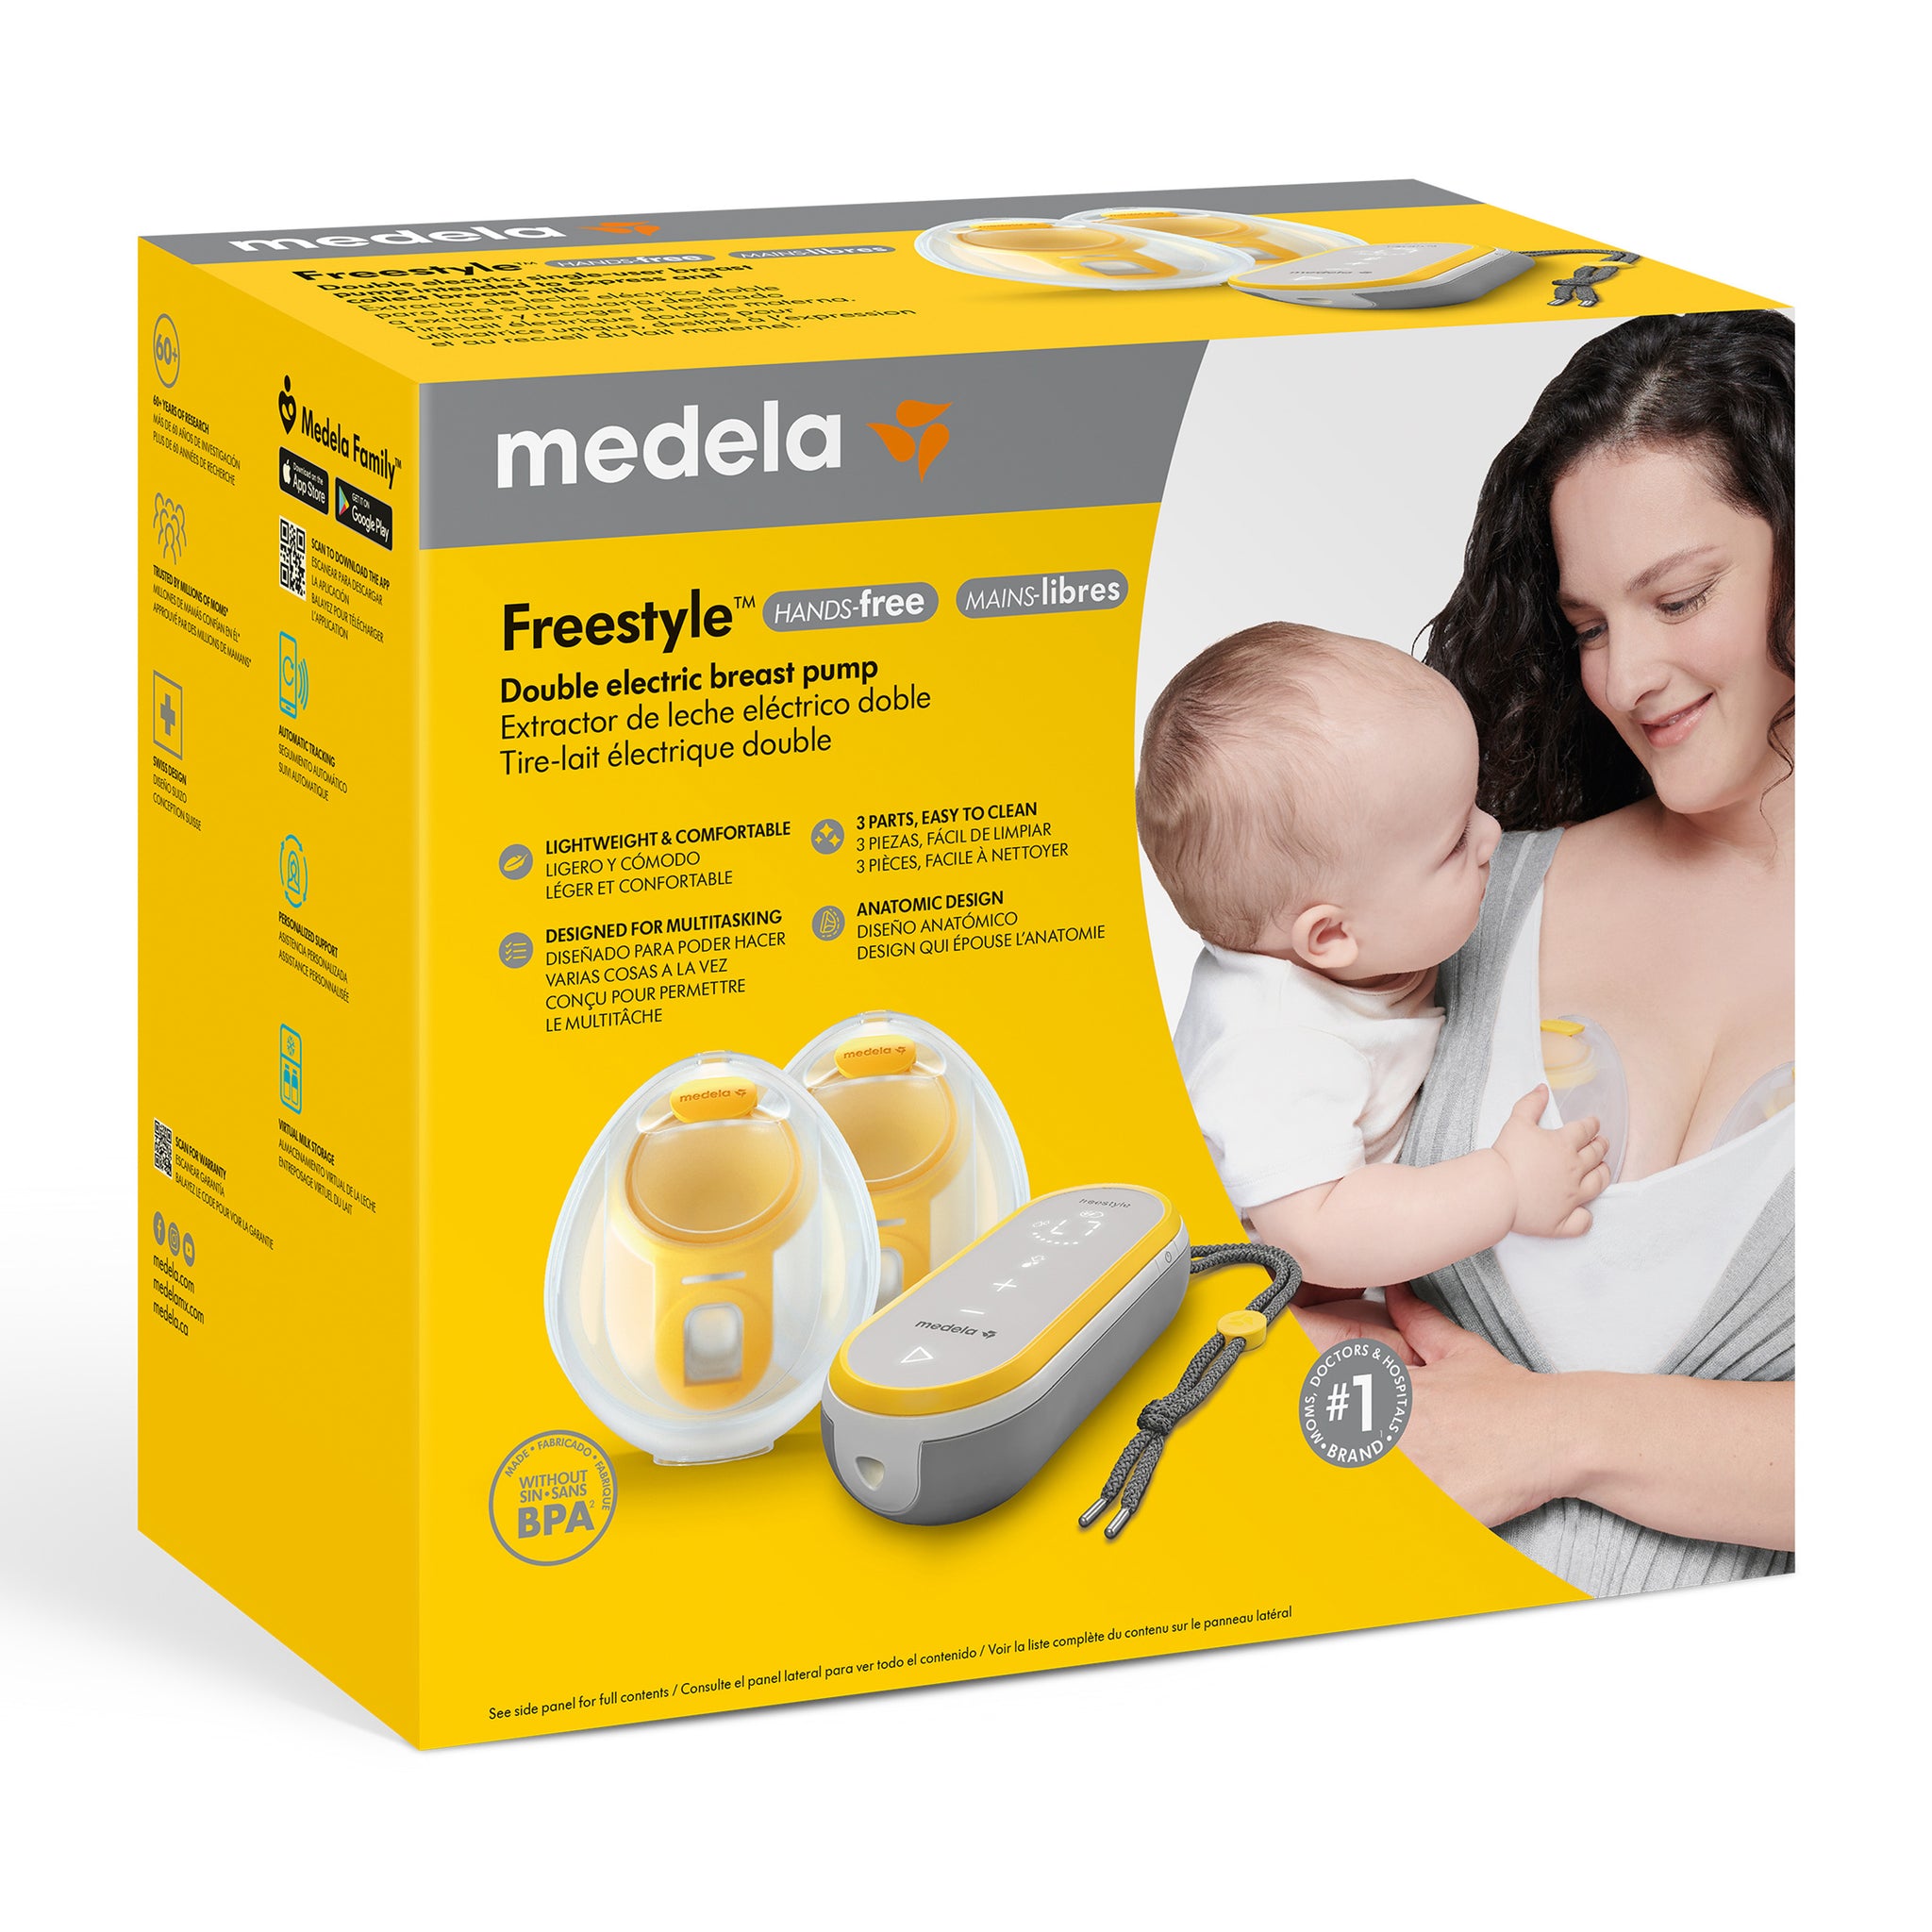 Vriend Gewend verrassing Medela Freestyle Breast Pump - Live Life Your Way With This Double Electric  Breast Pump! – The Breast Pump Store